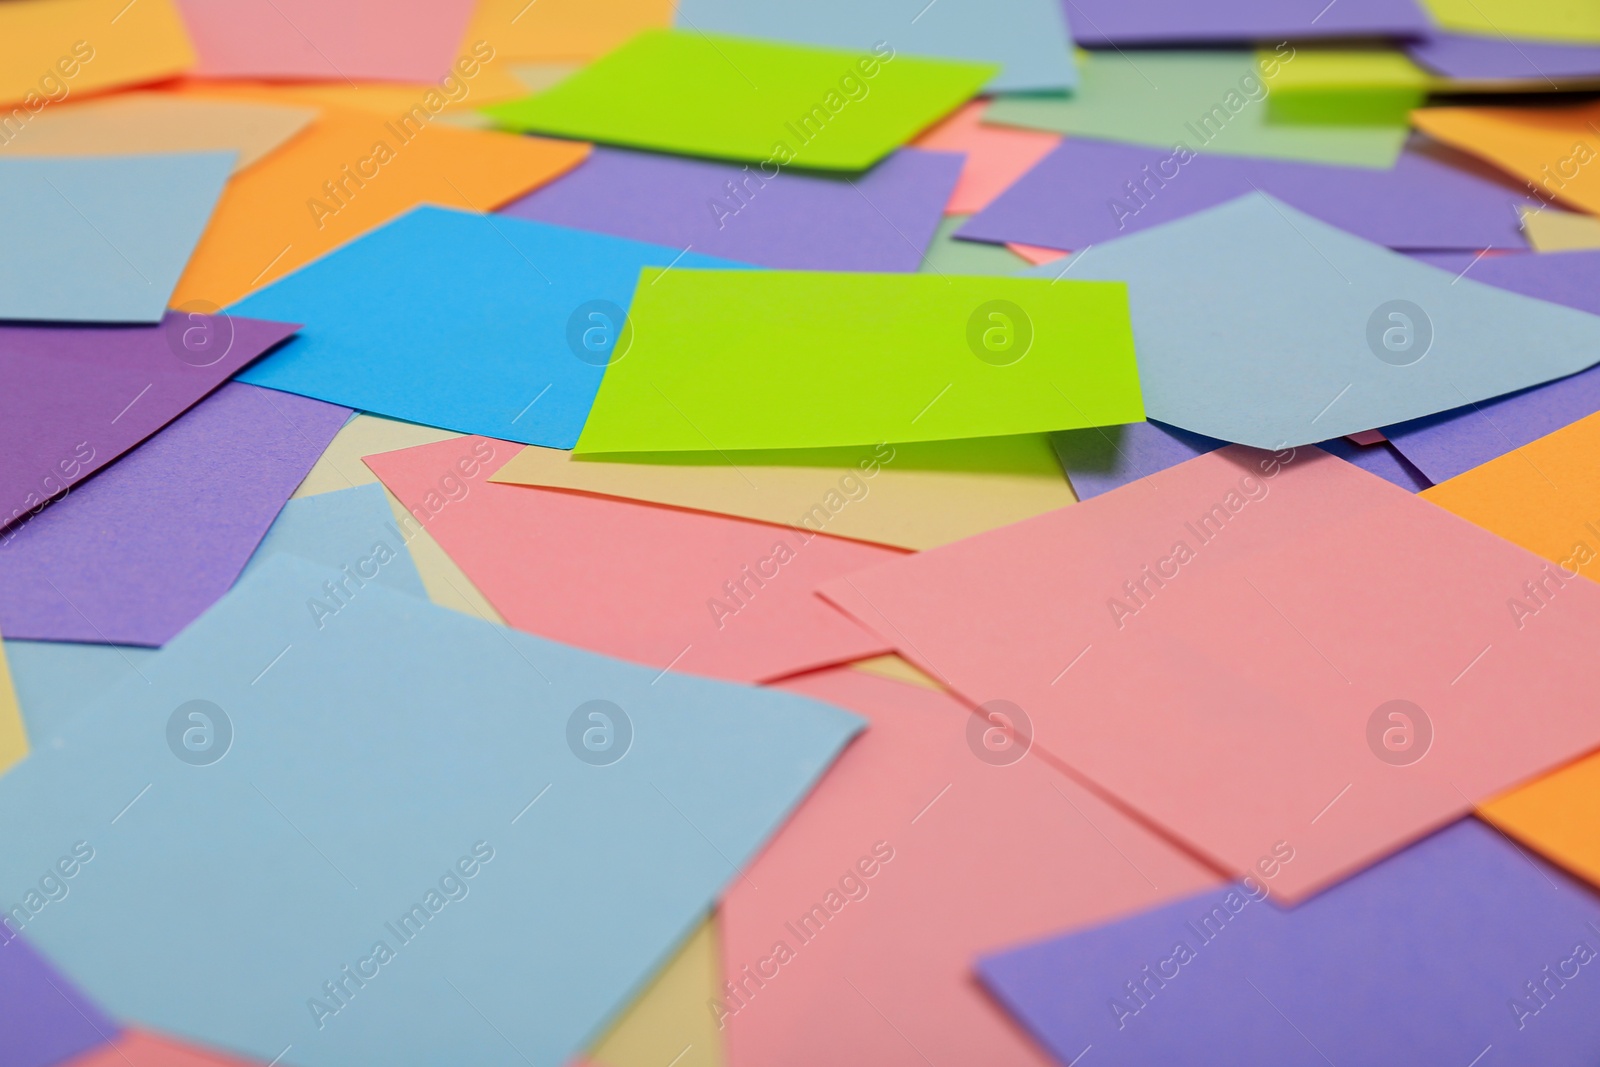 Photo of Many colorful stickers as background, closeup view